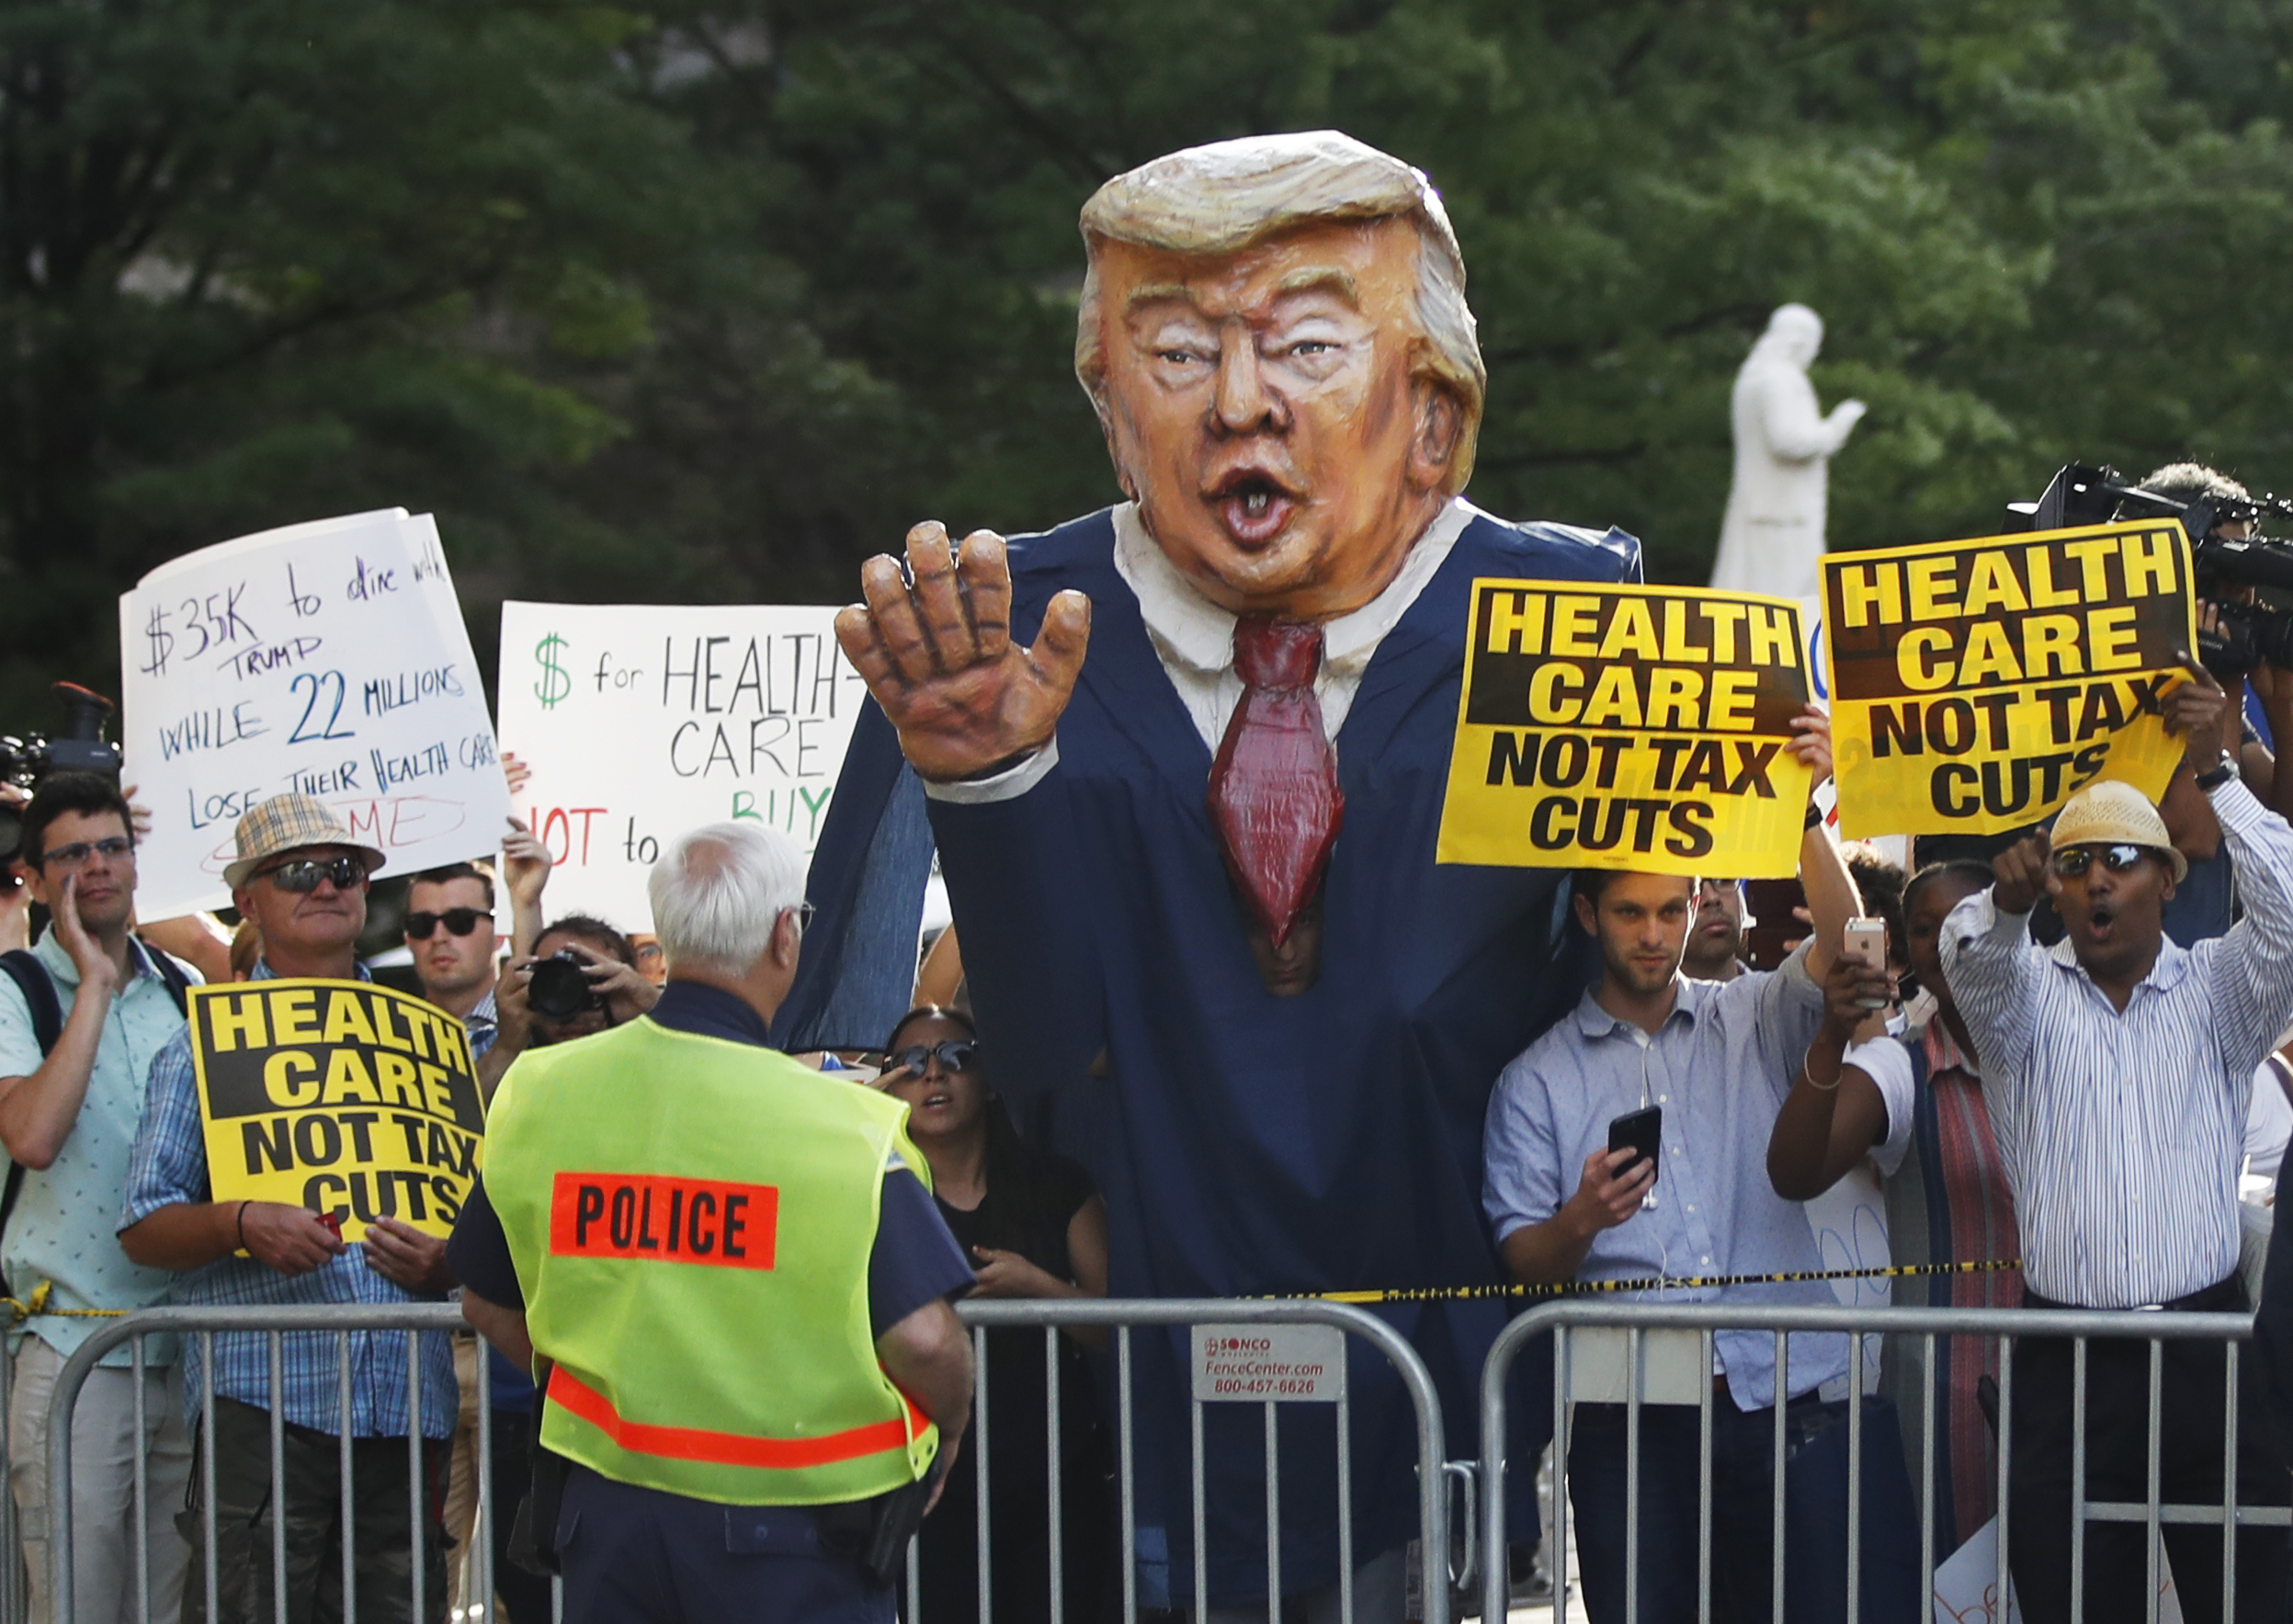 Protesters gather outside the Trump International Hotel in Washington, June 28, 2017, as President Donald Trump arrives at the hotel for fundraiser. (Manuel Balce Ceneta—AP)